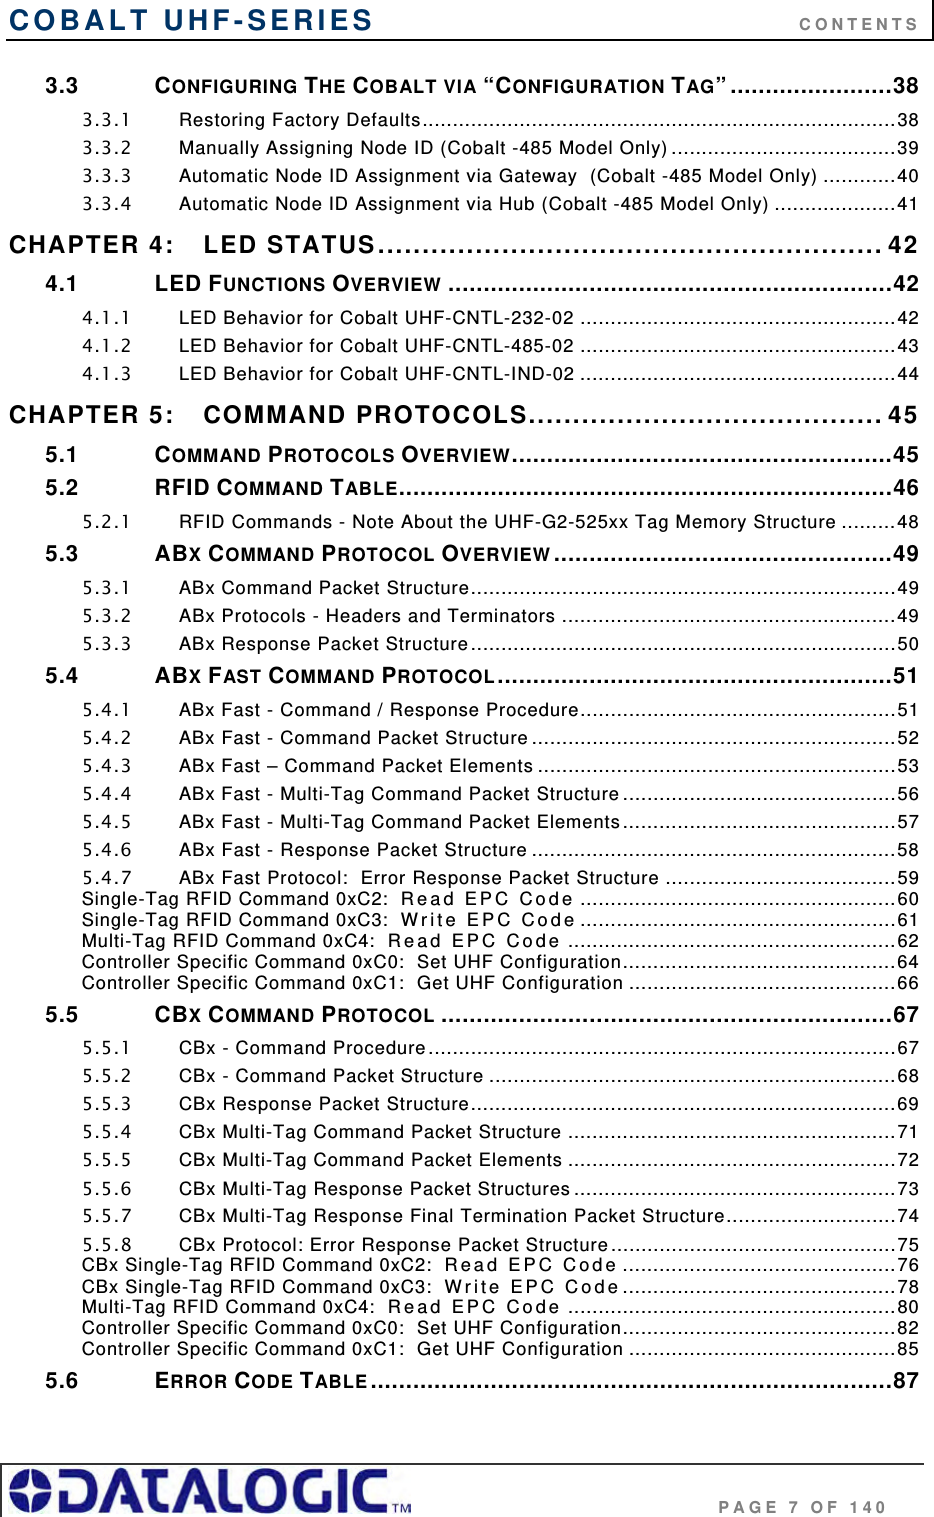 COBALT UHF-SERIES      CONTENTS                                     PAGE 7 OF 140 3.3 CONFIGURING THE COBALT VIA “CONFIGURATION TAG” .......................38 3.3.1 Restoring Factory Defaults..............................................................................38 3.3.2 Manually Assigning Node ID (Cobalt -485 Model Only) .....................................39 3.3.3 Automatic Node ID Assignment via Gateway  (Cobalt -485 Model Only) ............40 3.3.4 Automatic Node ID Assignment via Hub (Cobalt -485 Model Only) ....................41 CHAPTER 4: LED STATUS......................................................... 42 4.1 LED FUNCTIONS OVERVIEW ...............................................................42 4.1.1 LED Behavior for Cobalt UHF-CNTL-232-02 ....................................................42 4.1.2 LED Behavior for Cobalt UHF-CNTL-485-02 ....................................................43 4.1.3 LED Behavior for Cobalt UHF-CNTL-IND-02 ....................................................44 CHAPTER 5: COMMAND PROTOCOLS........................................ 45 5.1 COMMAND PROTOCOLS OVERVIEW......................................................45 5.2 RFID COMMAND TABLE......................................................................46 5.2.1 RFID Commands - Note About the UHF-G2-525xx Tag Memory Structure .........48 5.3 ABX COMMAND PROTOCOL OVERVIEW ................................................49 5.3.1 ABx Command Packet Structure......................................................................49 5.3.2 ABx Protocols - Headers and Terminators .......................................................49 5.3.3 ABx Response Packet Structure......................................................................50 5.4 ABX FAST COMMAND PROTOCOL........................................................51 5.4.1 ABx Fast - Command / Response Procedure....................................................51 5.4.2 ABx Fast - Command Packet Structure ............................................................52 5.4.3 ABx Fast – Command Packet Elements ...........................................................53 5.4.4 ABx Fast - Multi-Tag Command Packet Structure .............................................56 5.4.5 ABx Fast - Multi-Tag Command Packet Elements.............................................57 5.4.6 ABx Fast - Response Packet Structure ............................................................58 5.4.7 ABx Fast Protocol:  Error Response Packet Structure ......................................59 Single-Tag RFID Command 0xC2:  Re ad   EP C  Co de ....................................................60 Single-Tag RFID Command 0xC3:  Wr it e  E PC C o de ....................................................61 Multi-Tag RFID Command 0xC4:  Re ad  E P C  Co d e ......................................................62 Controller Specific Command 0xC0:  Set UHF Configuration.............................................64 Controller Specific Command 0xC1:  Get UHF Configuration ............................................66 5.5 CBX COMMAND PROTOCOL ................................................................67 5.5.1 CBx - Command Procedure.............................................................................67 5.5.2 CBx - Command Packet Structure ...................................................................68 5.5.3 CBx Response Packet Structure......................................................................69 5.5.4 CBx Multi-Tag Command Packet Structure ......................................................71 5.5.5 CBx Multi-Tag Command Packet Elements ......................................................72 5.5.6 CBx Multi-Tag Response Packet Structures .....................................................73 5.5.7 CBx Multi-Tag Response Final Termination Packet Structure............................74 5.5.8 CBx Protocol: Error Response Packet Structure...............................................75 CBx Single-Tag RFID Command 0xC2:  Rea d  EP C  Cod e .............................................76 CBx Single-Tag RFID Command 0xC3:  Wr i te  E PC  C od e .............................................78 Multi-Tag RFID Command 0xC4:  Re ad  E P C  Co d e ......................................................80 Controller Specific Command 0xC0:  Set UHF Configuration.............................................82 Controller Specific Command 0xC1:  Get UHF Configuration ............................................85 5.6 ERROR CODE TABLE ..........................................................................87 